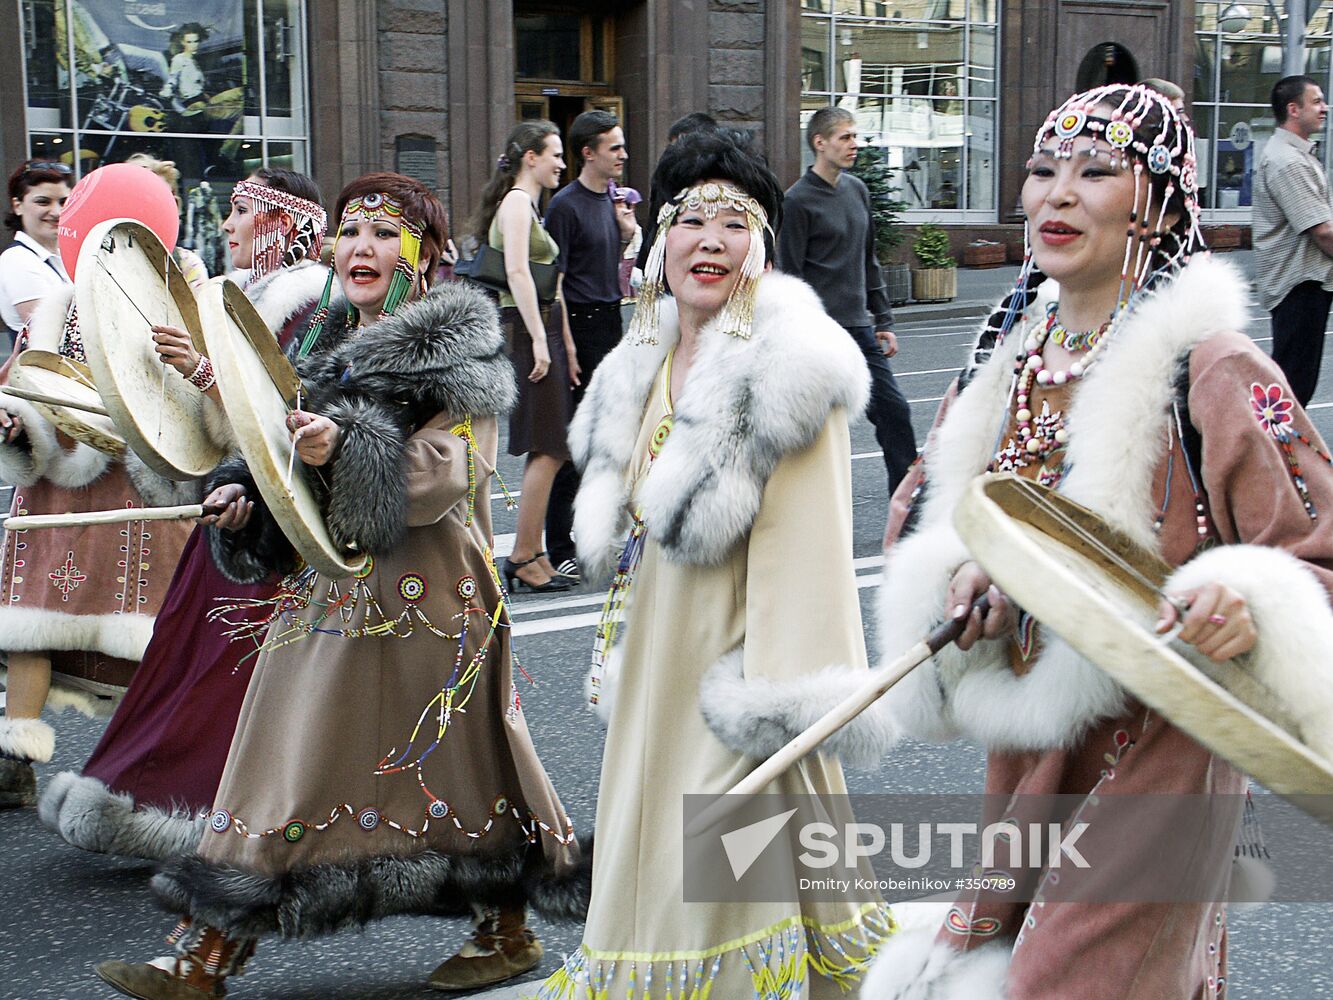 Participants of the Russian Lands and Peoples' Parade